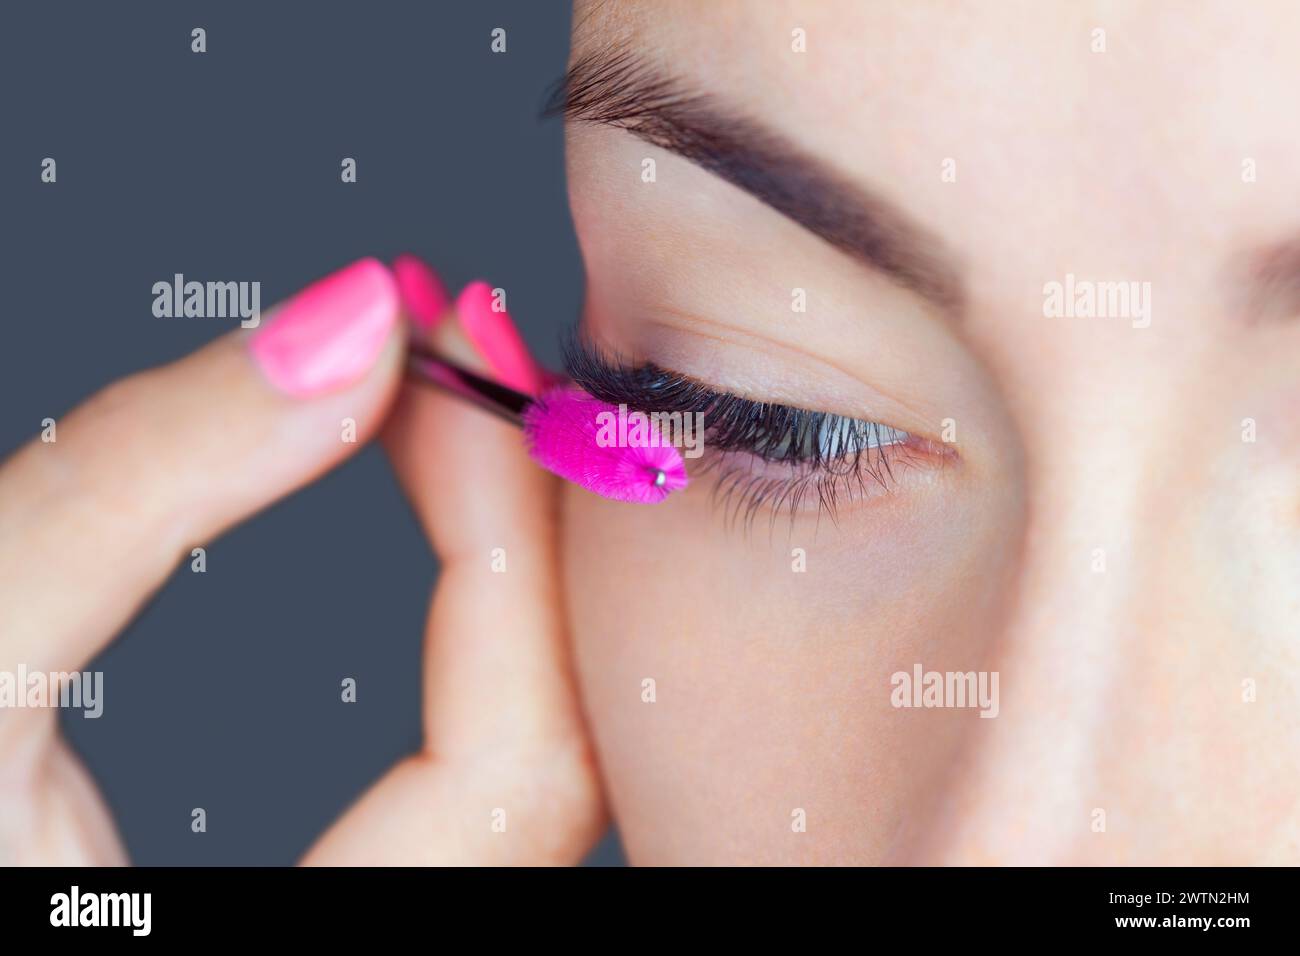 Beautiful Woman with long eyelashes in a beauty salon. Eyelash extension procedure. Lashes close up Stock Photo